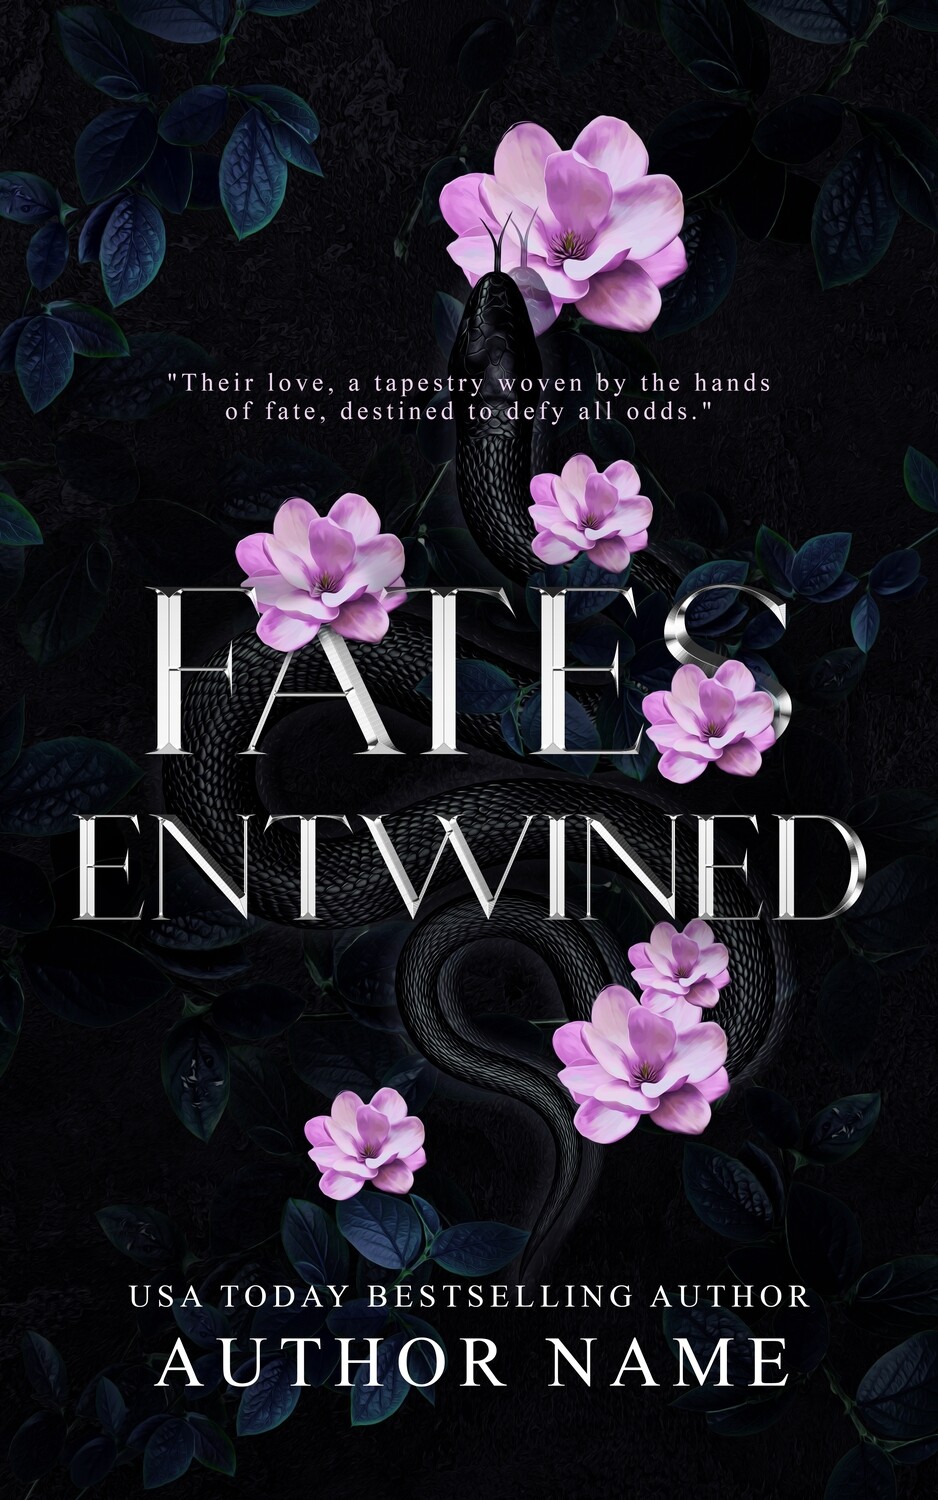 FATES ENTWINED